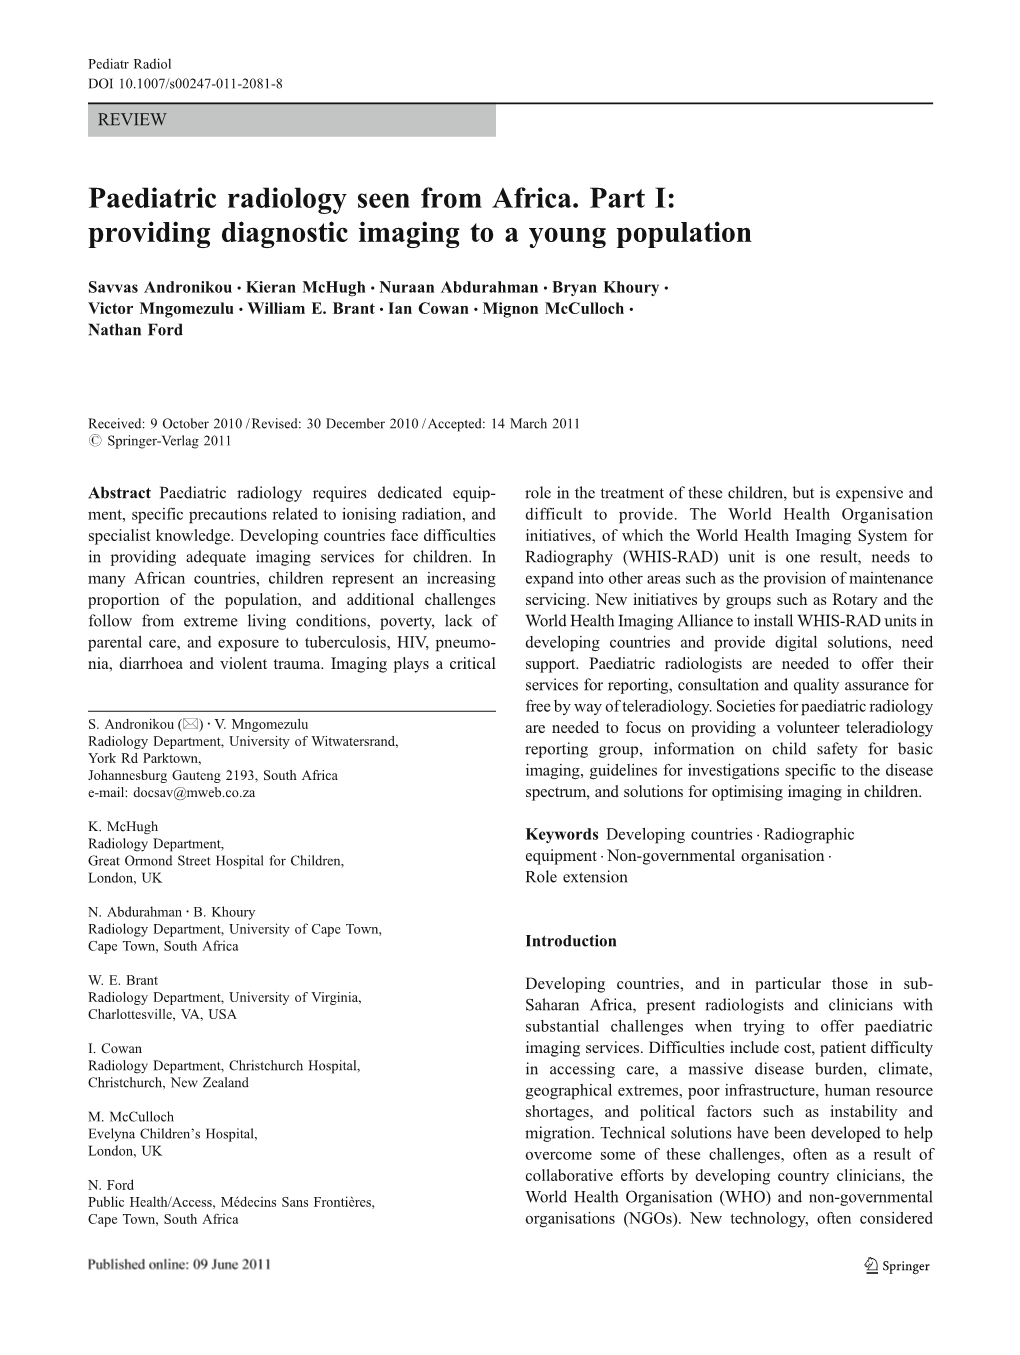 Paediatric Radiology Seen from Africa. Part I: Providing Diagnostic Imaging to a Young Population